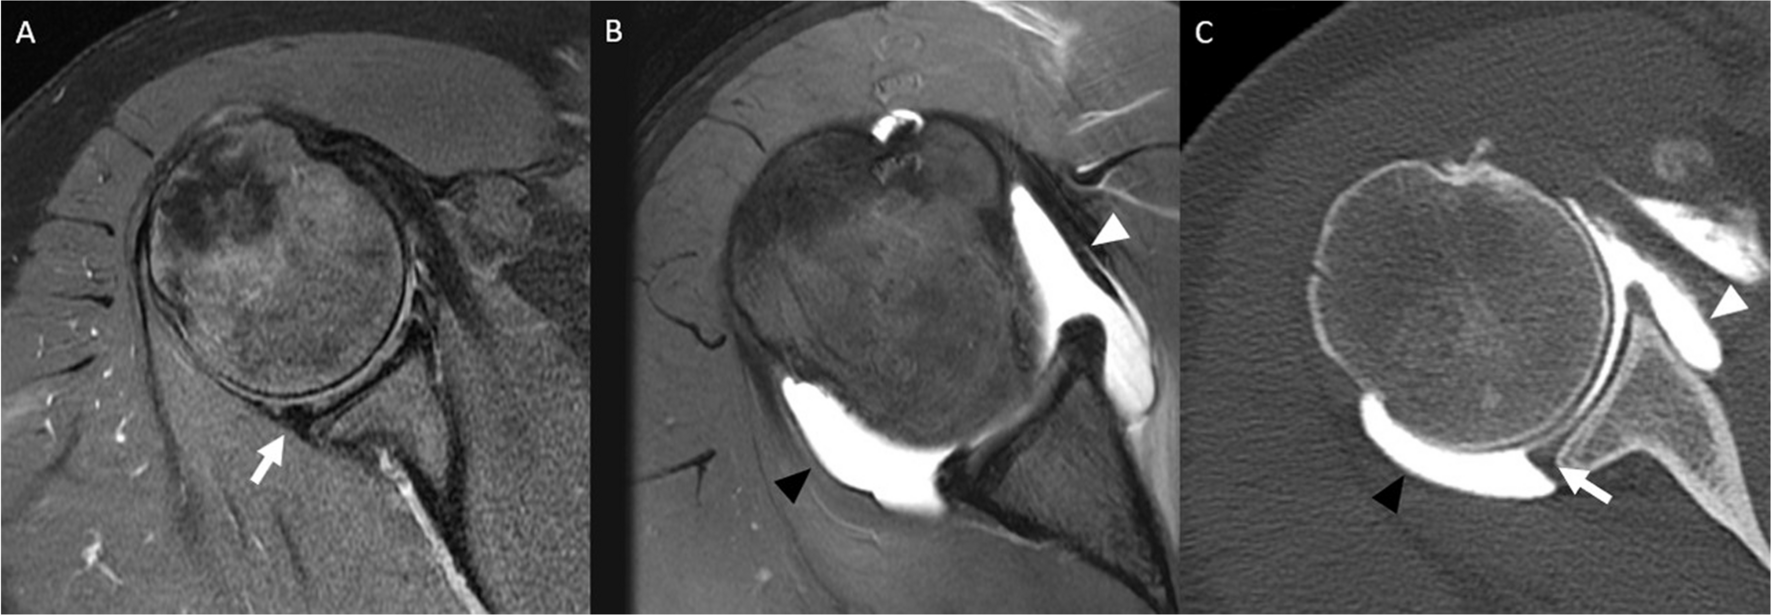 Radiographic and Advanced Imaging Evaluation of Posterior Shoulder Instability